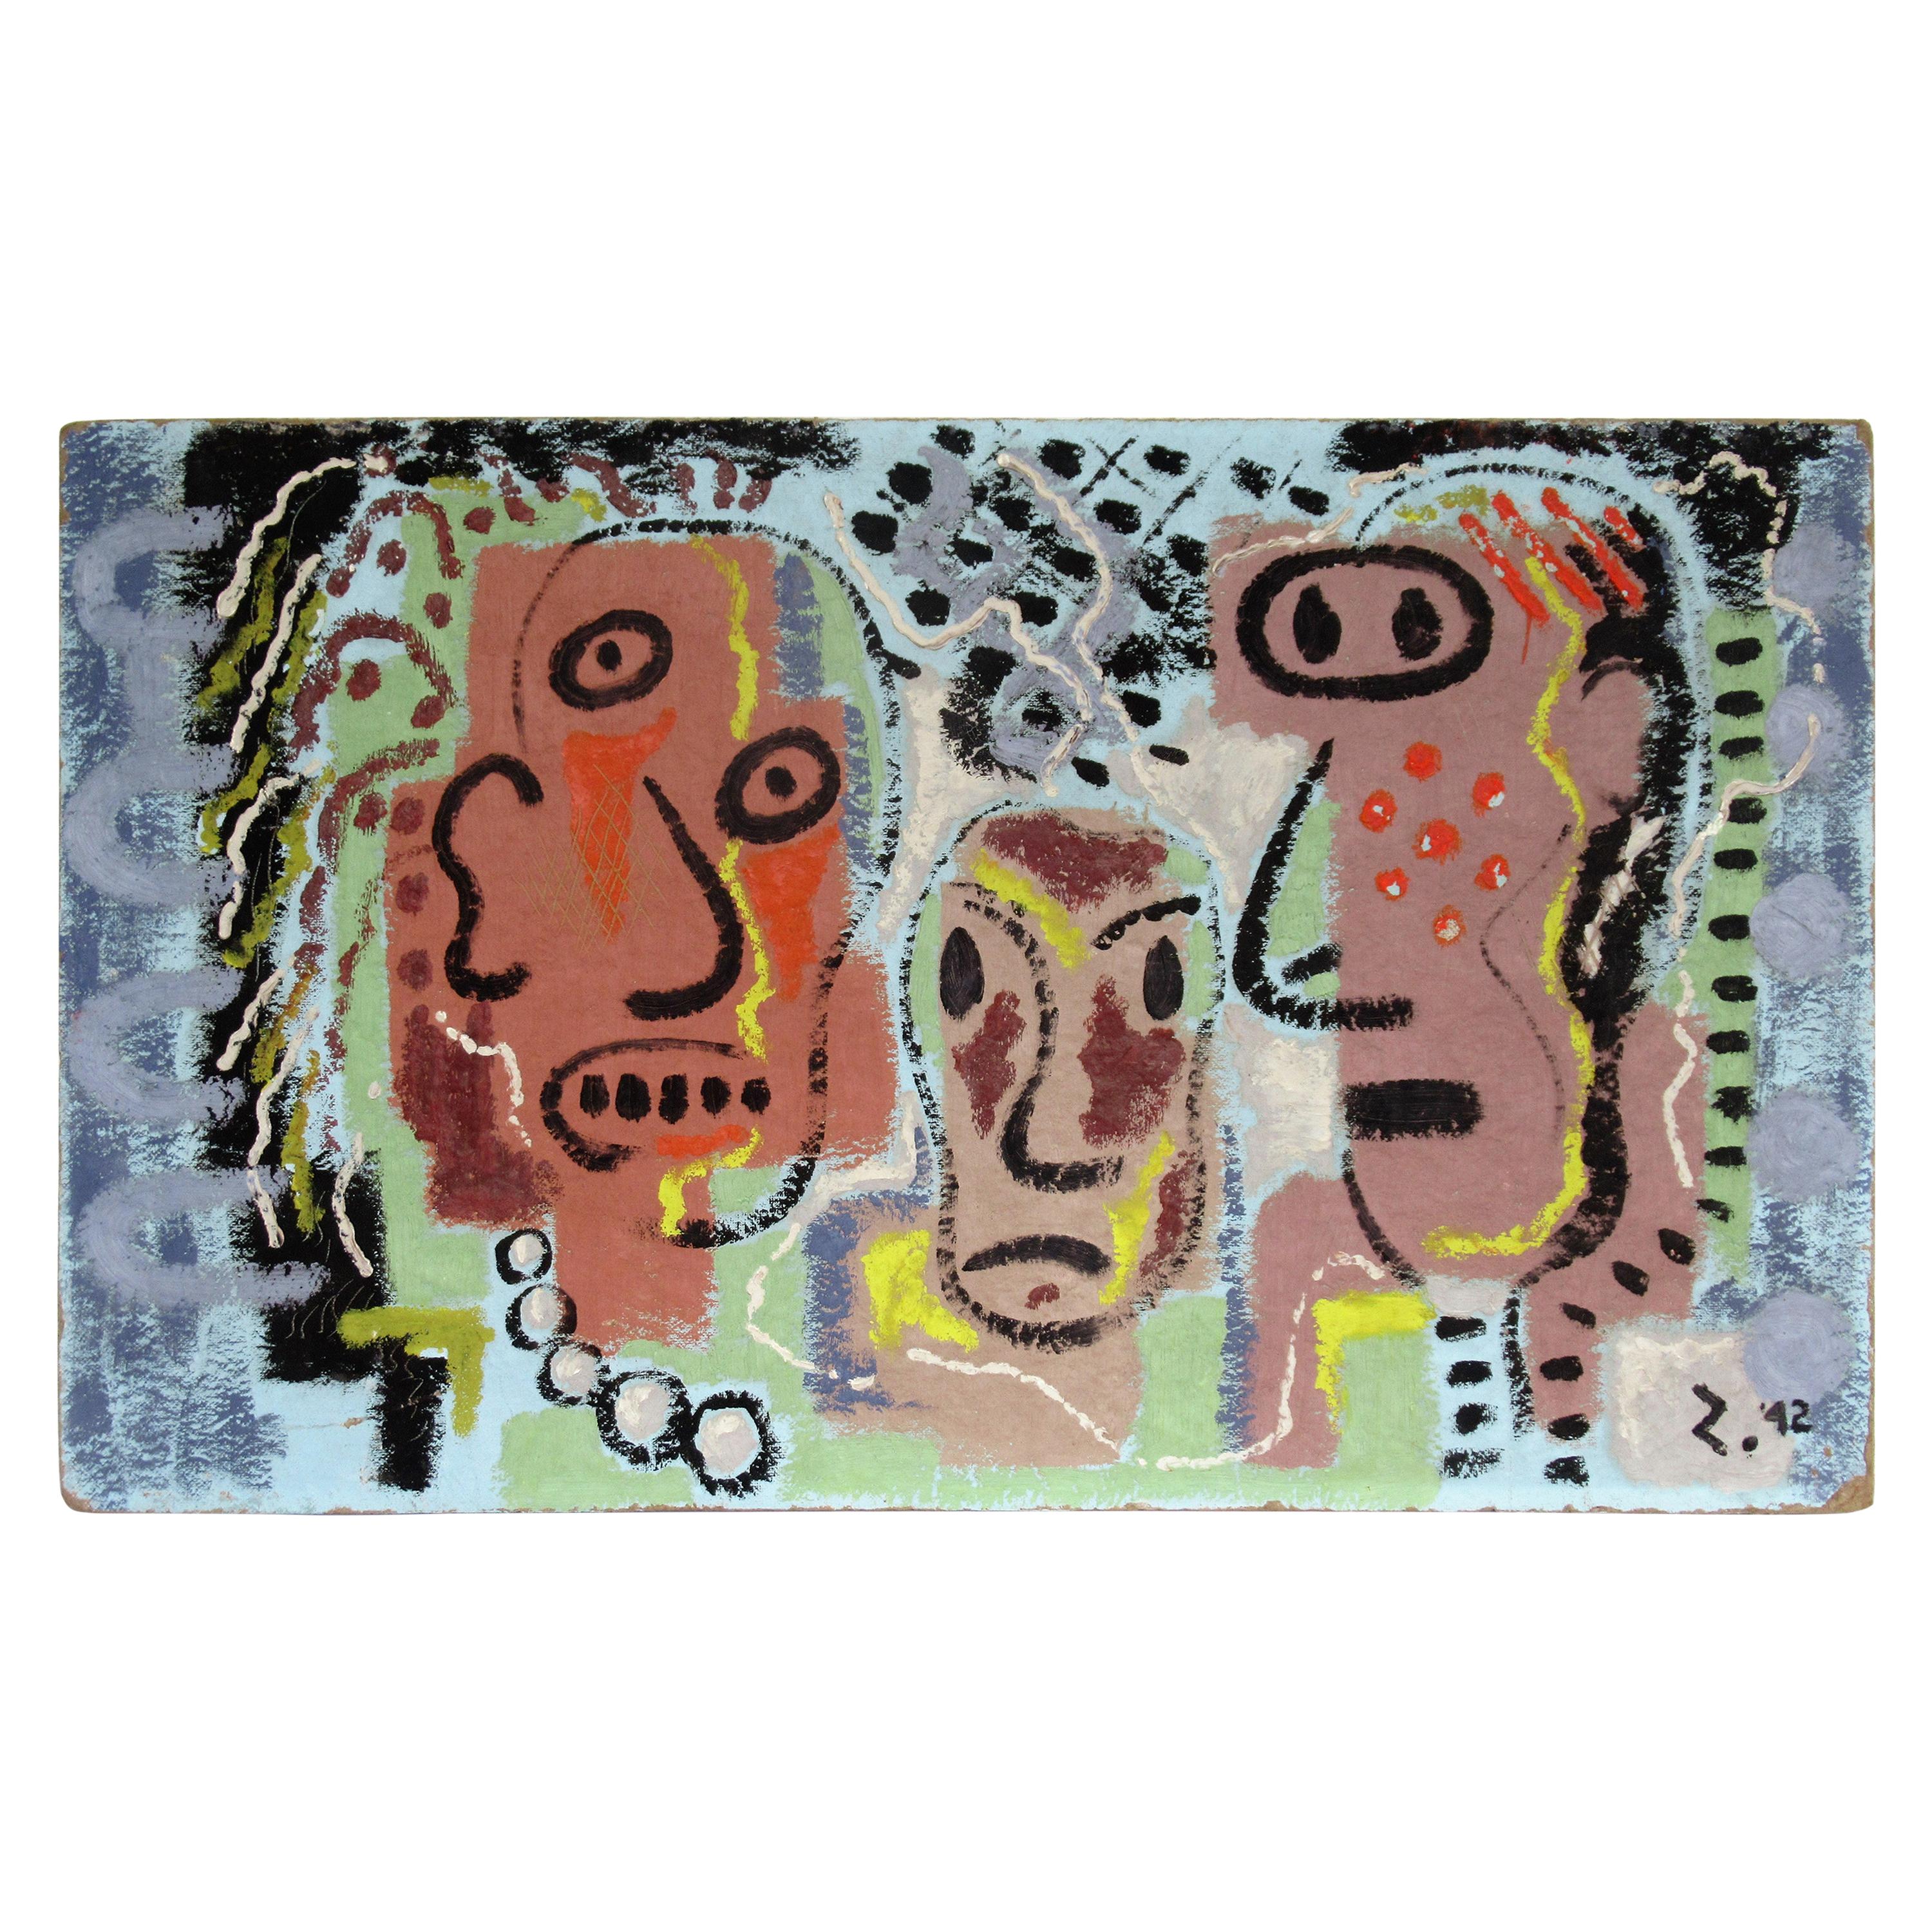 1940s American Modernist Painting of Three Faces